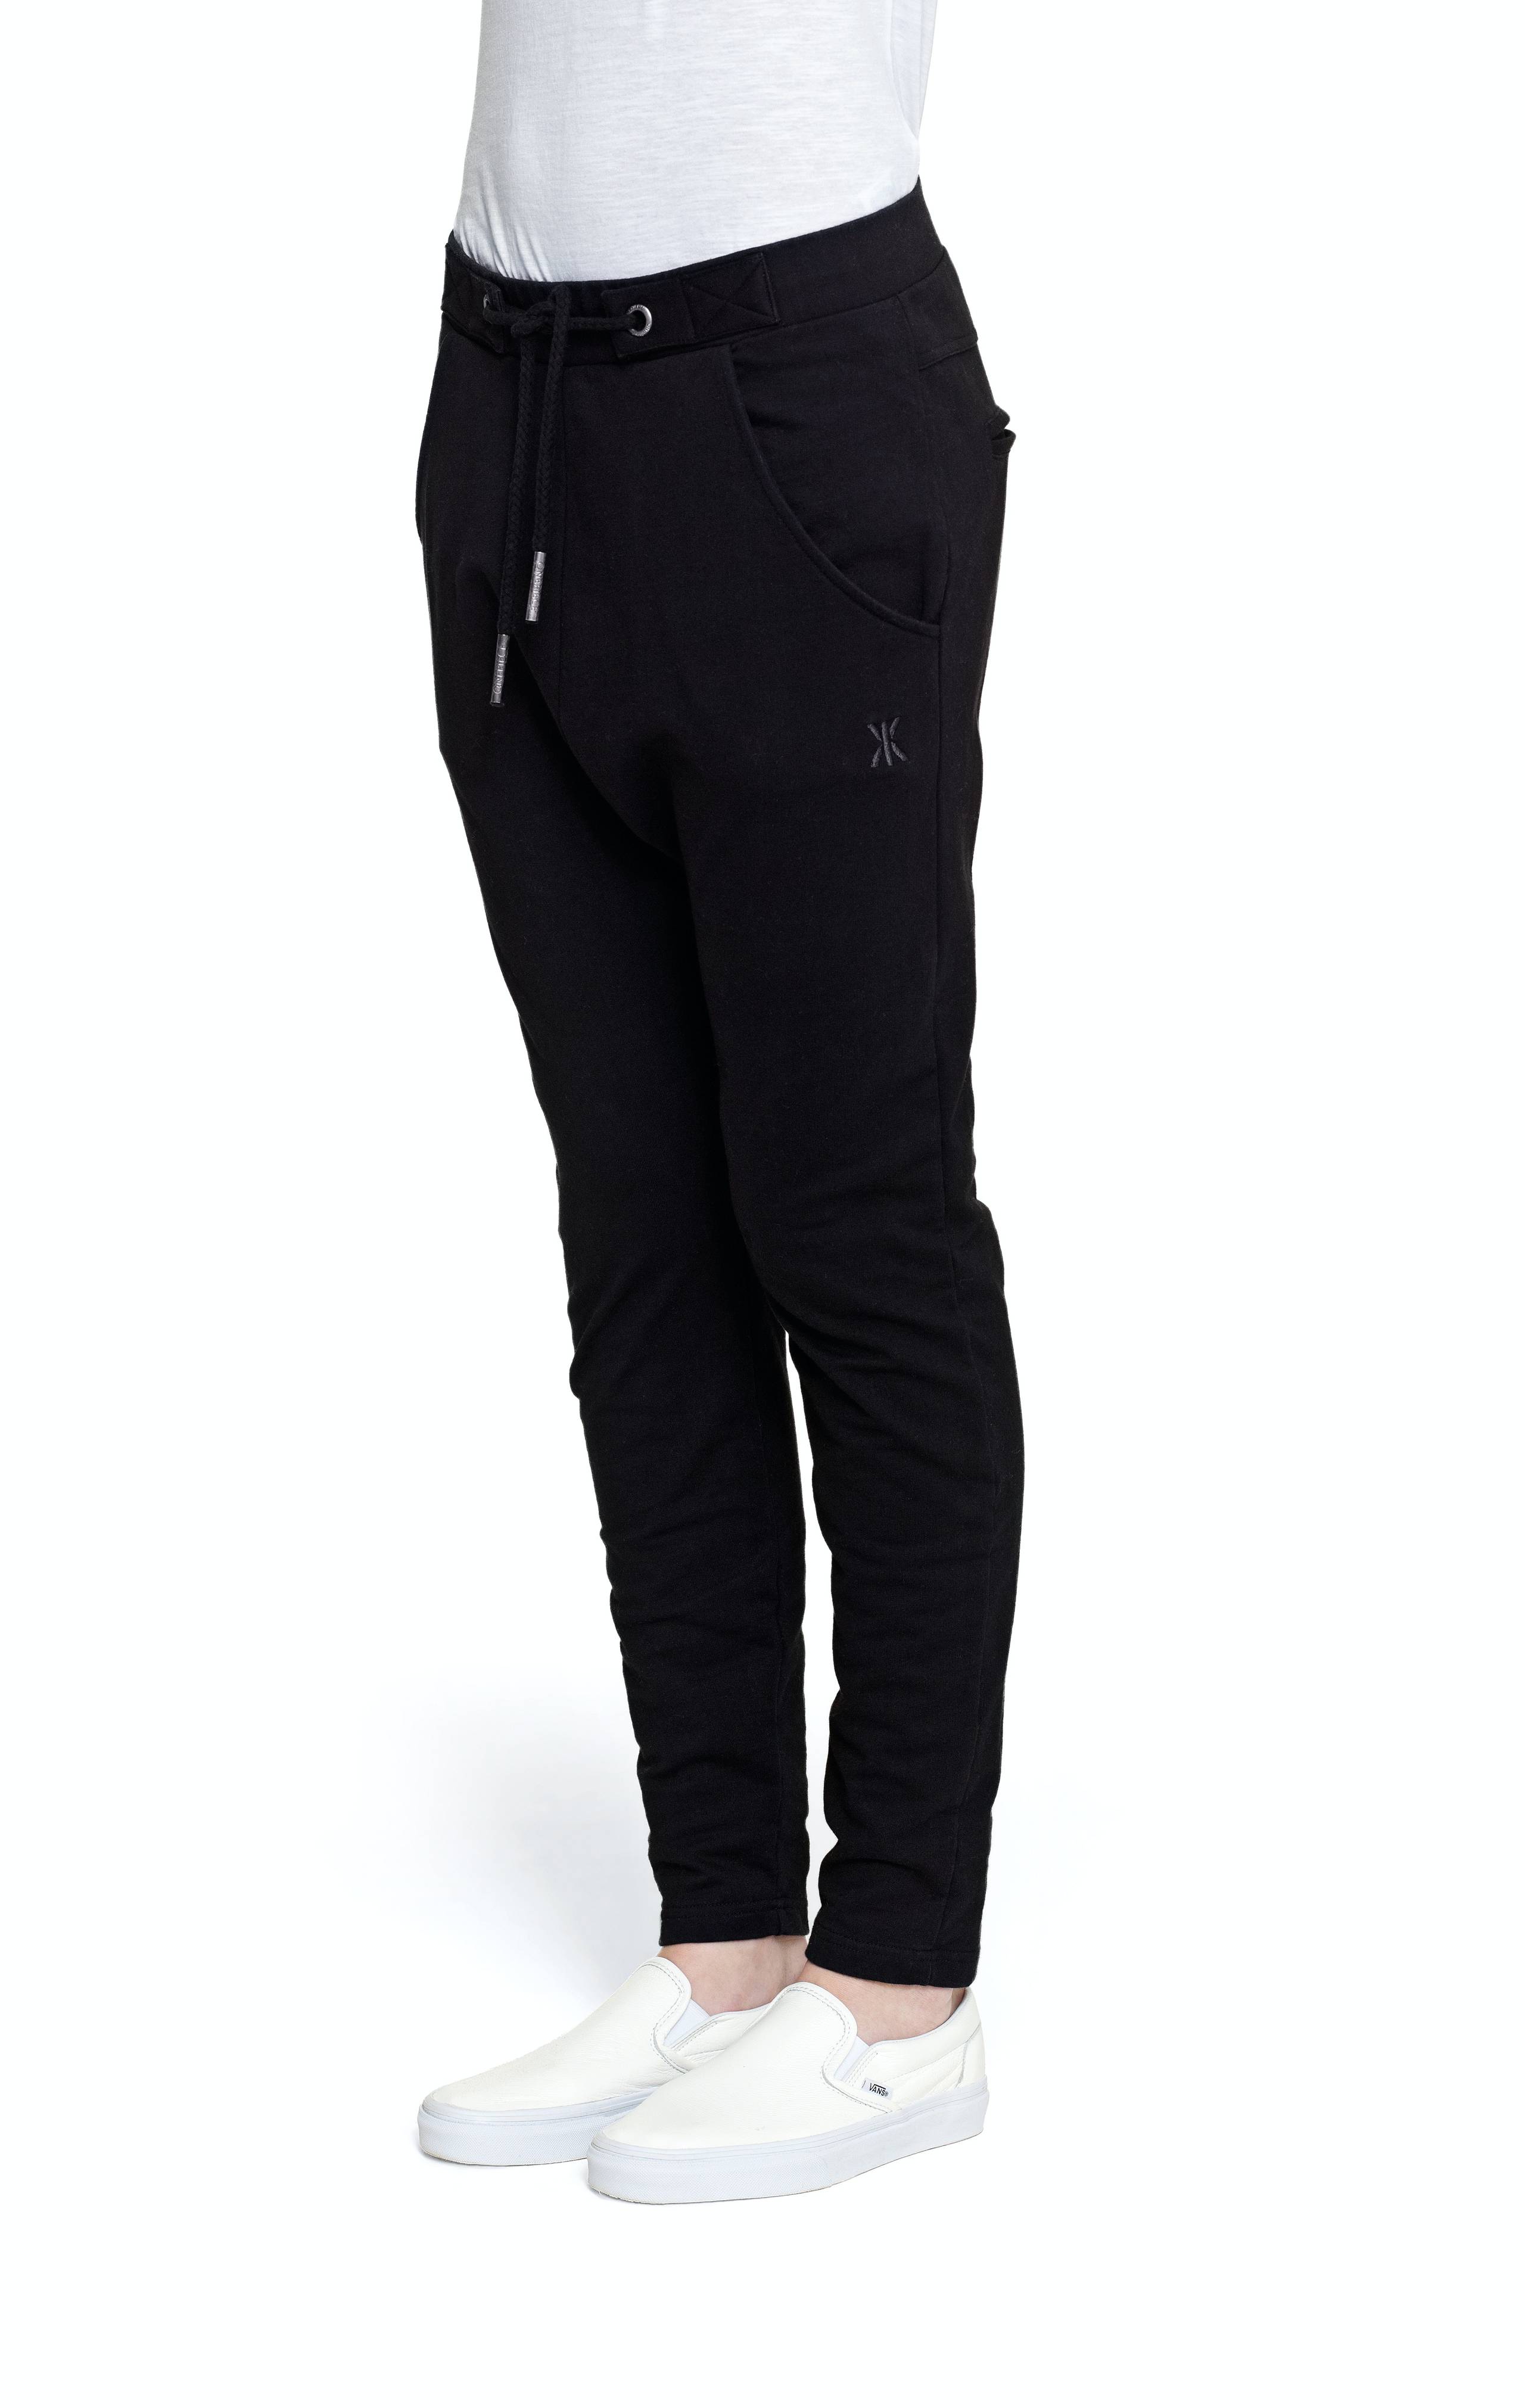 Onepiece Whatever Pants Black - 3